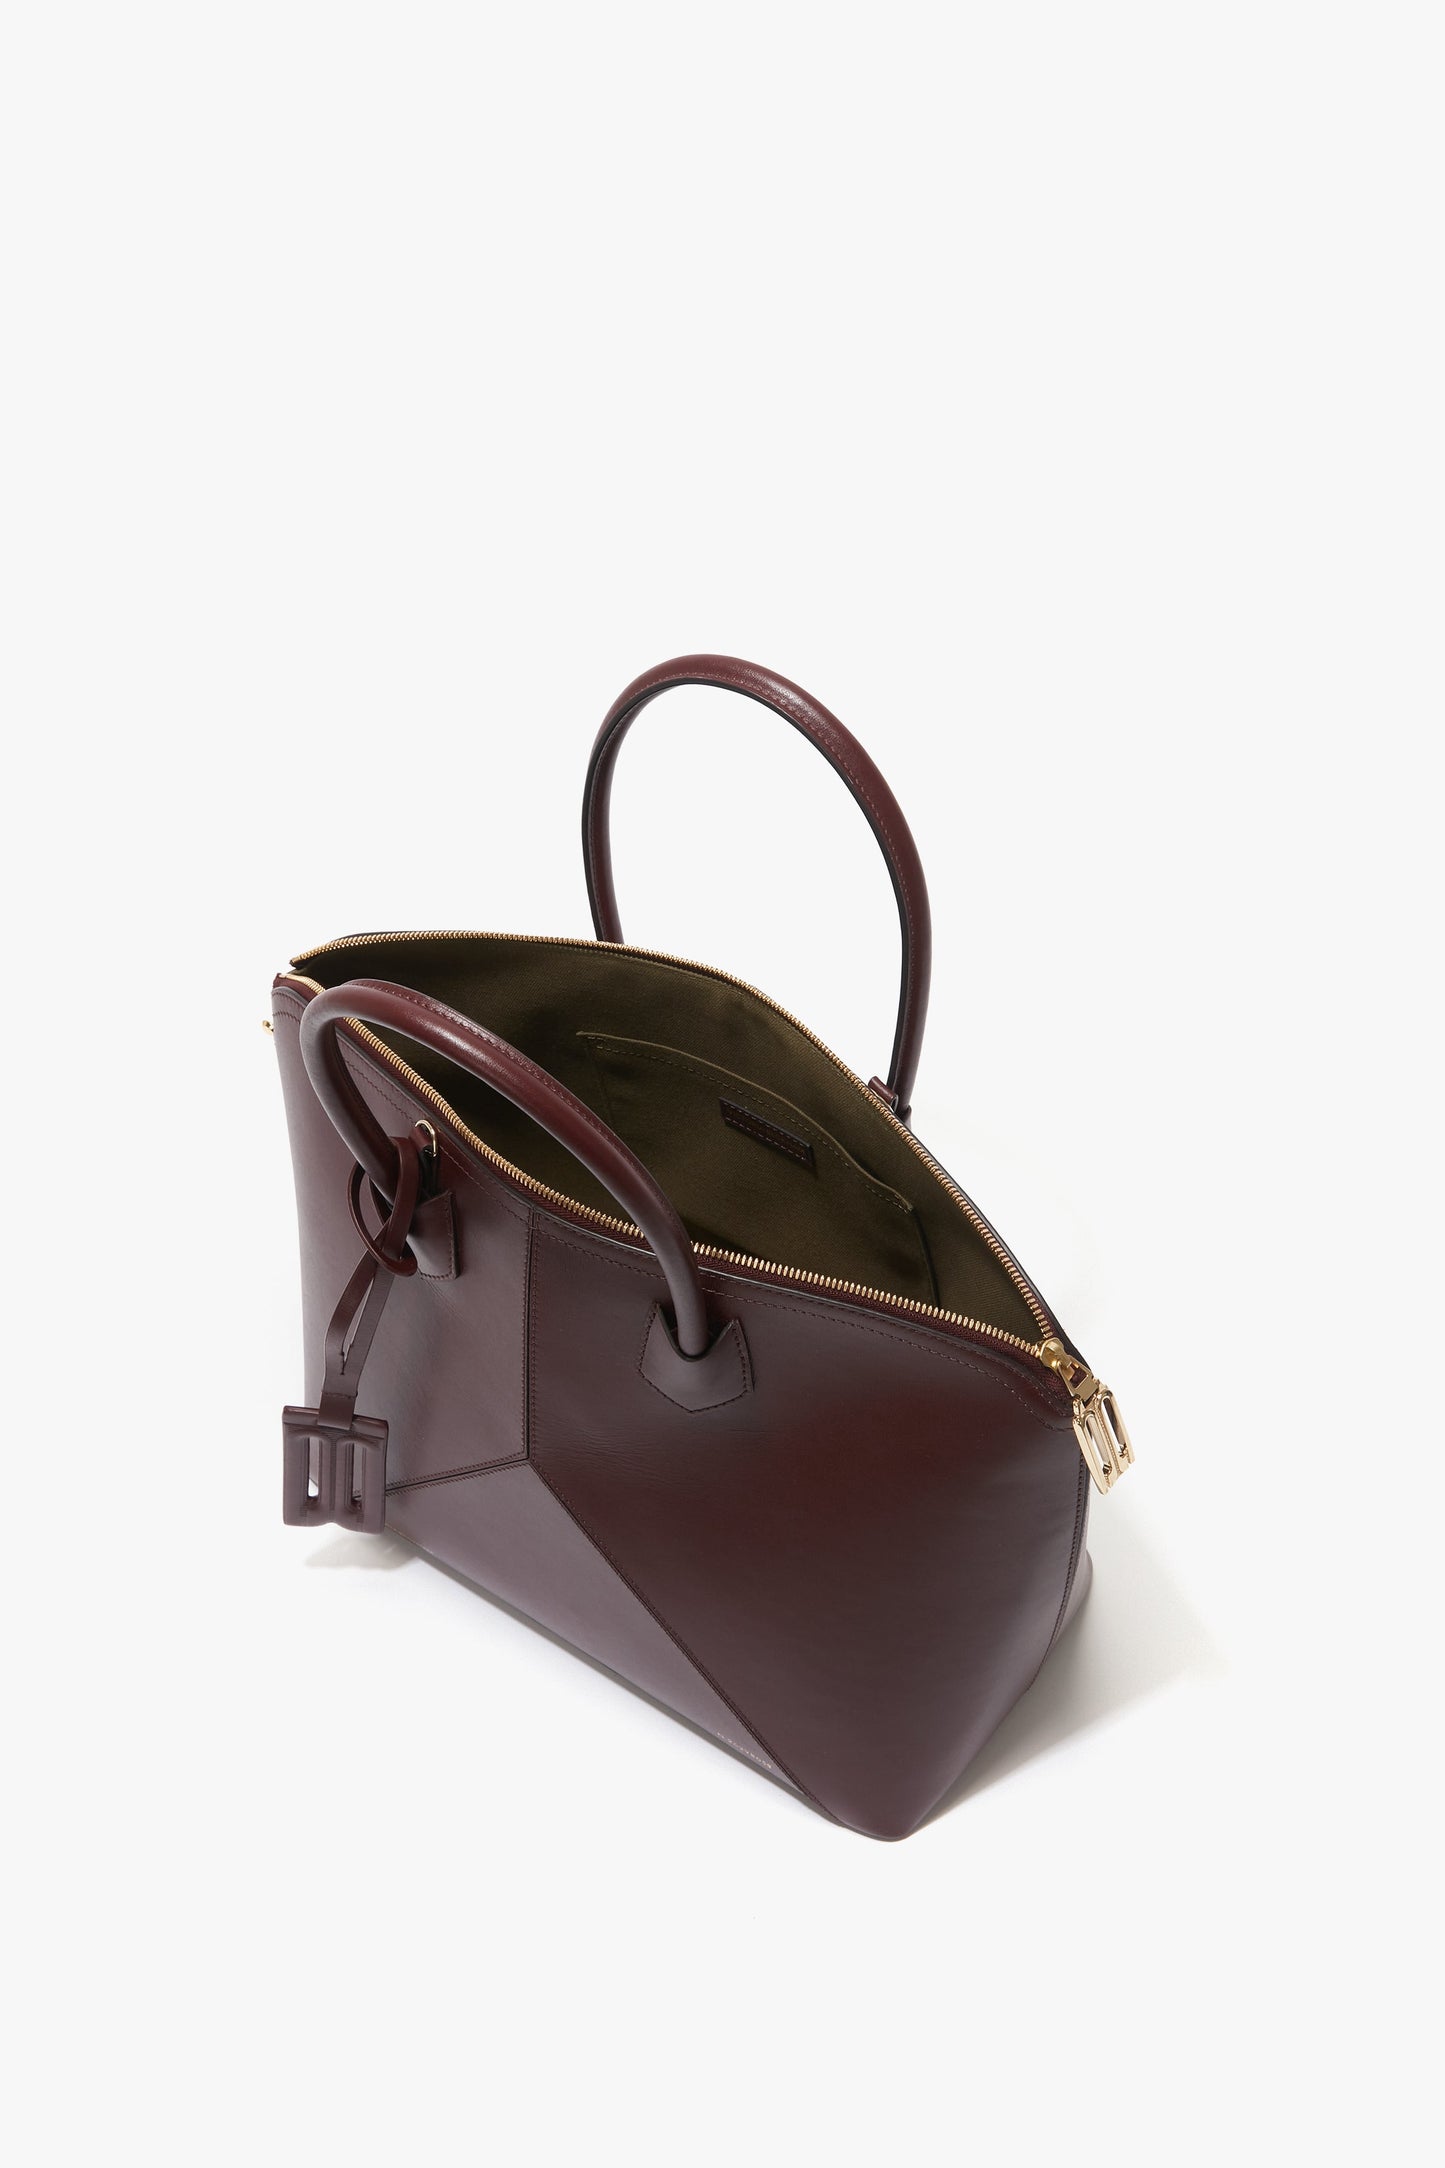 Open Victoria Beckham Victoria Bag In Burgundy Leather with a rectangular shape, featuring gold-tone zippers, dual handles, and a small external pocket with a buckle detail and padlock closure.